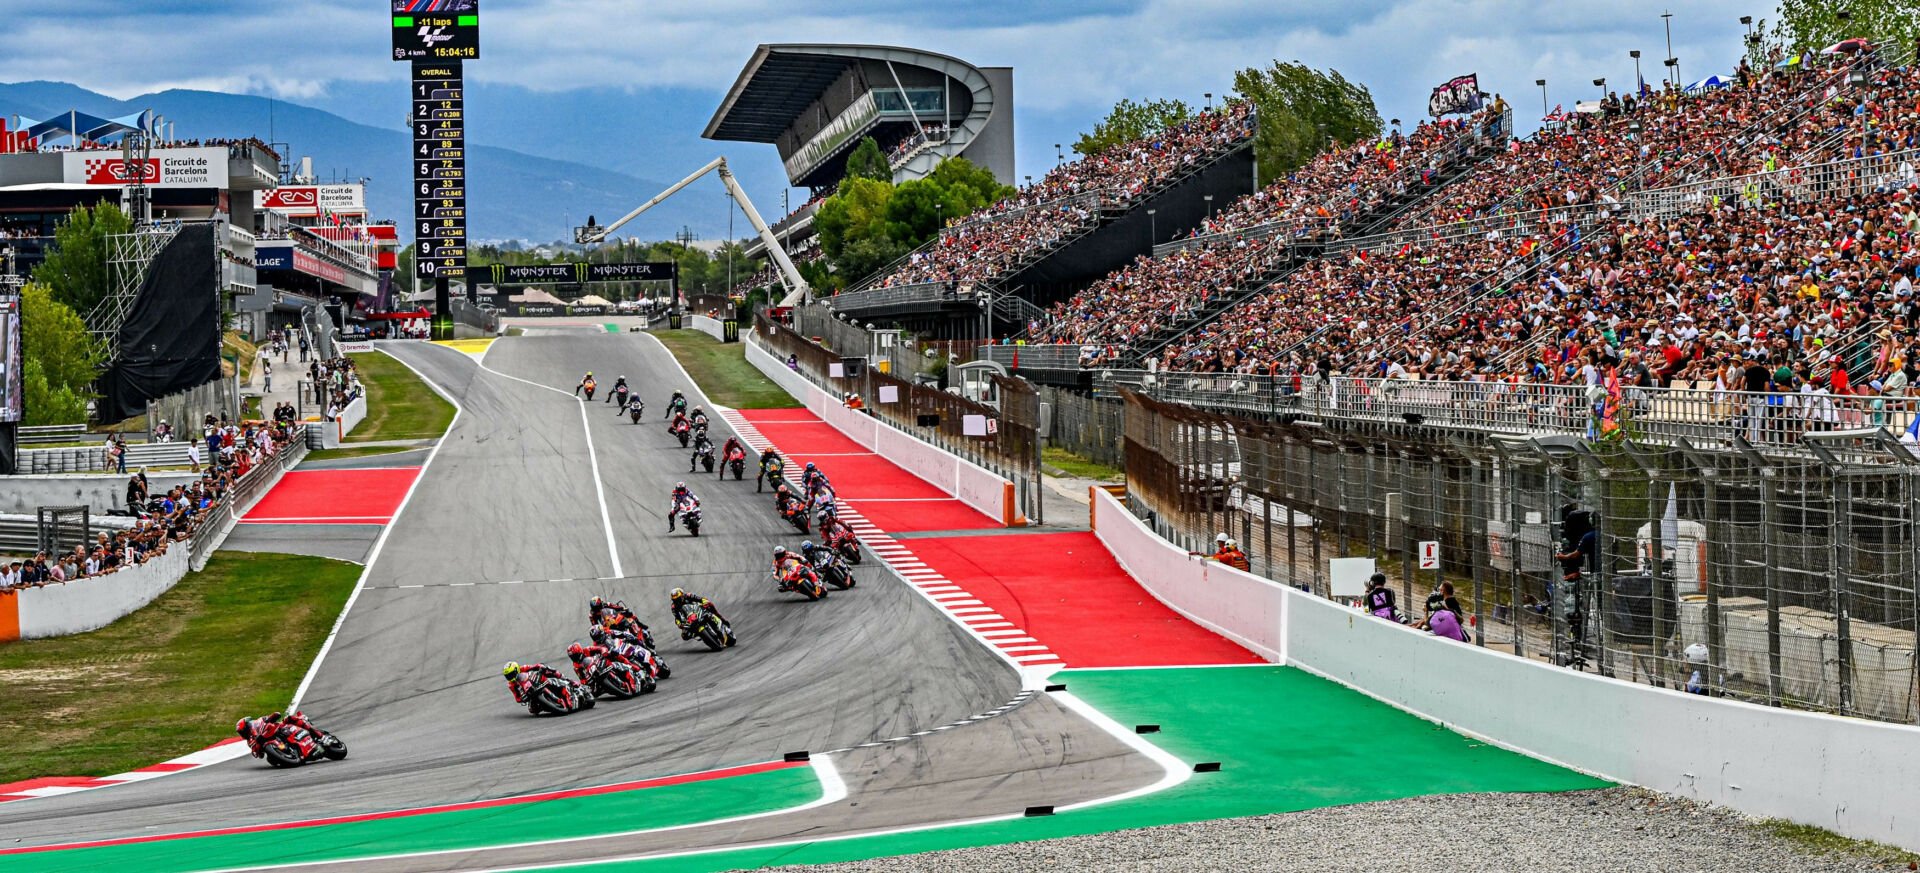 Dorna reports significant spectator and viewer growth so far in the 2023 MotoGP World Championship. Photo courtesy Dorna.